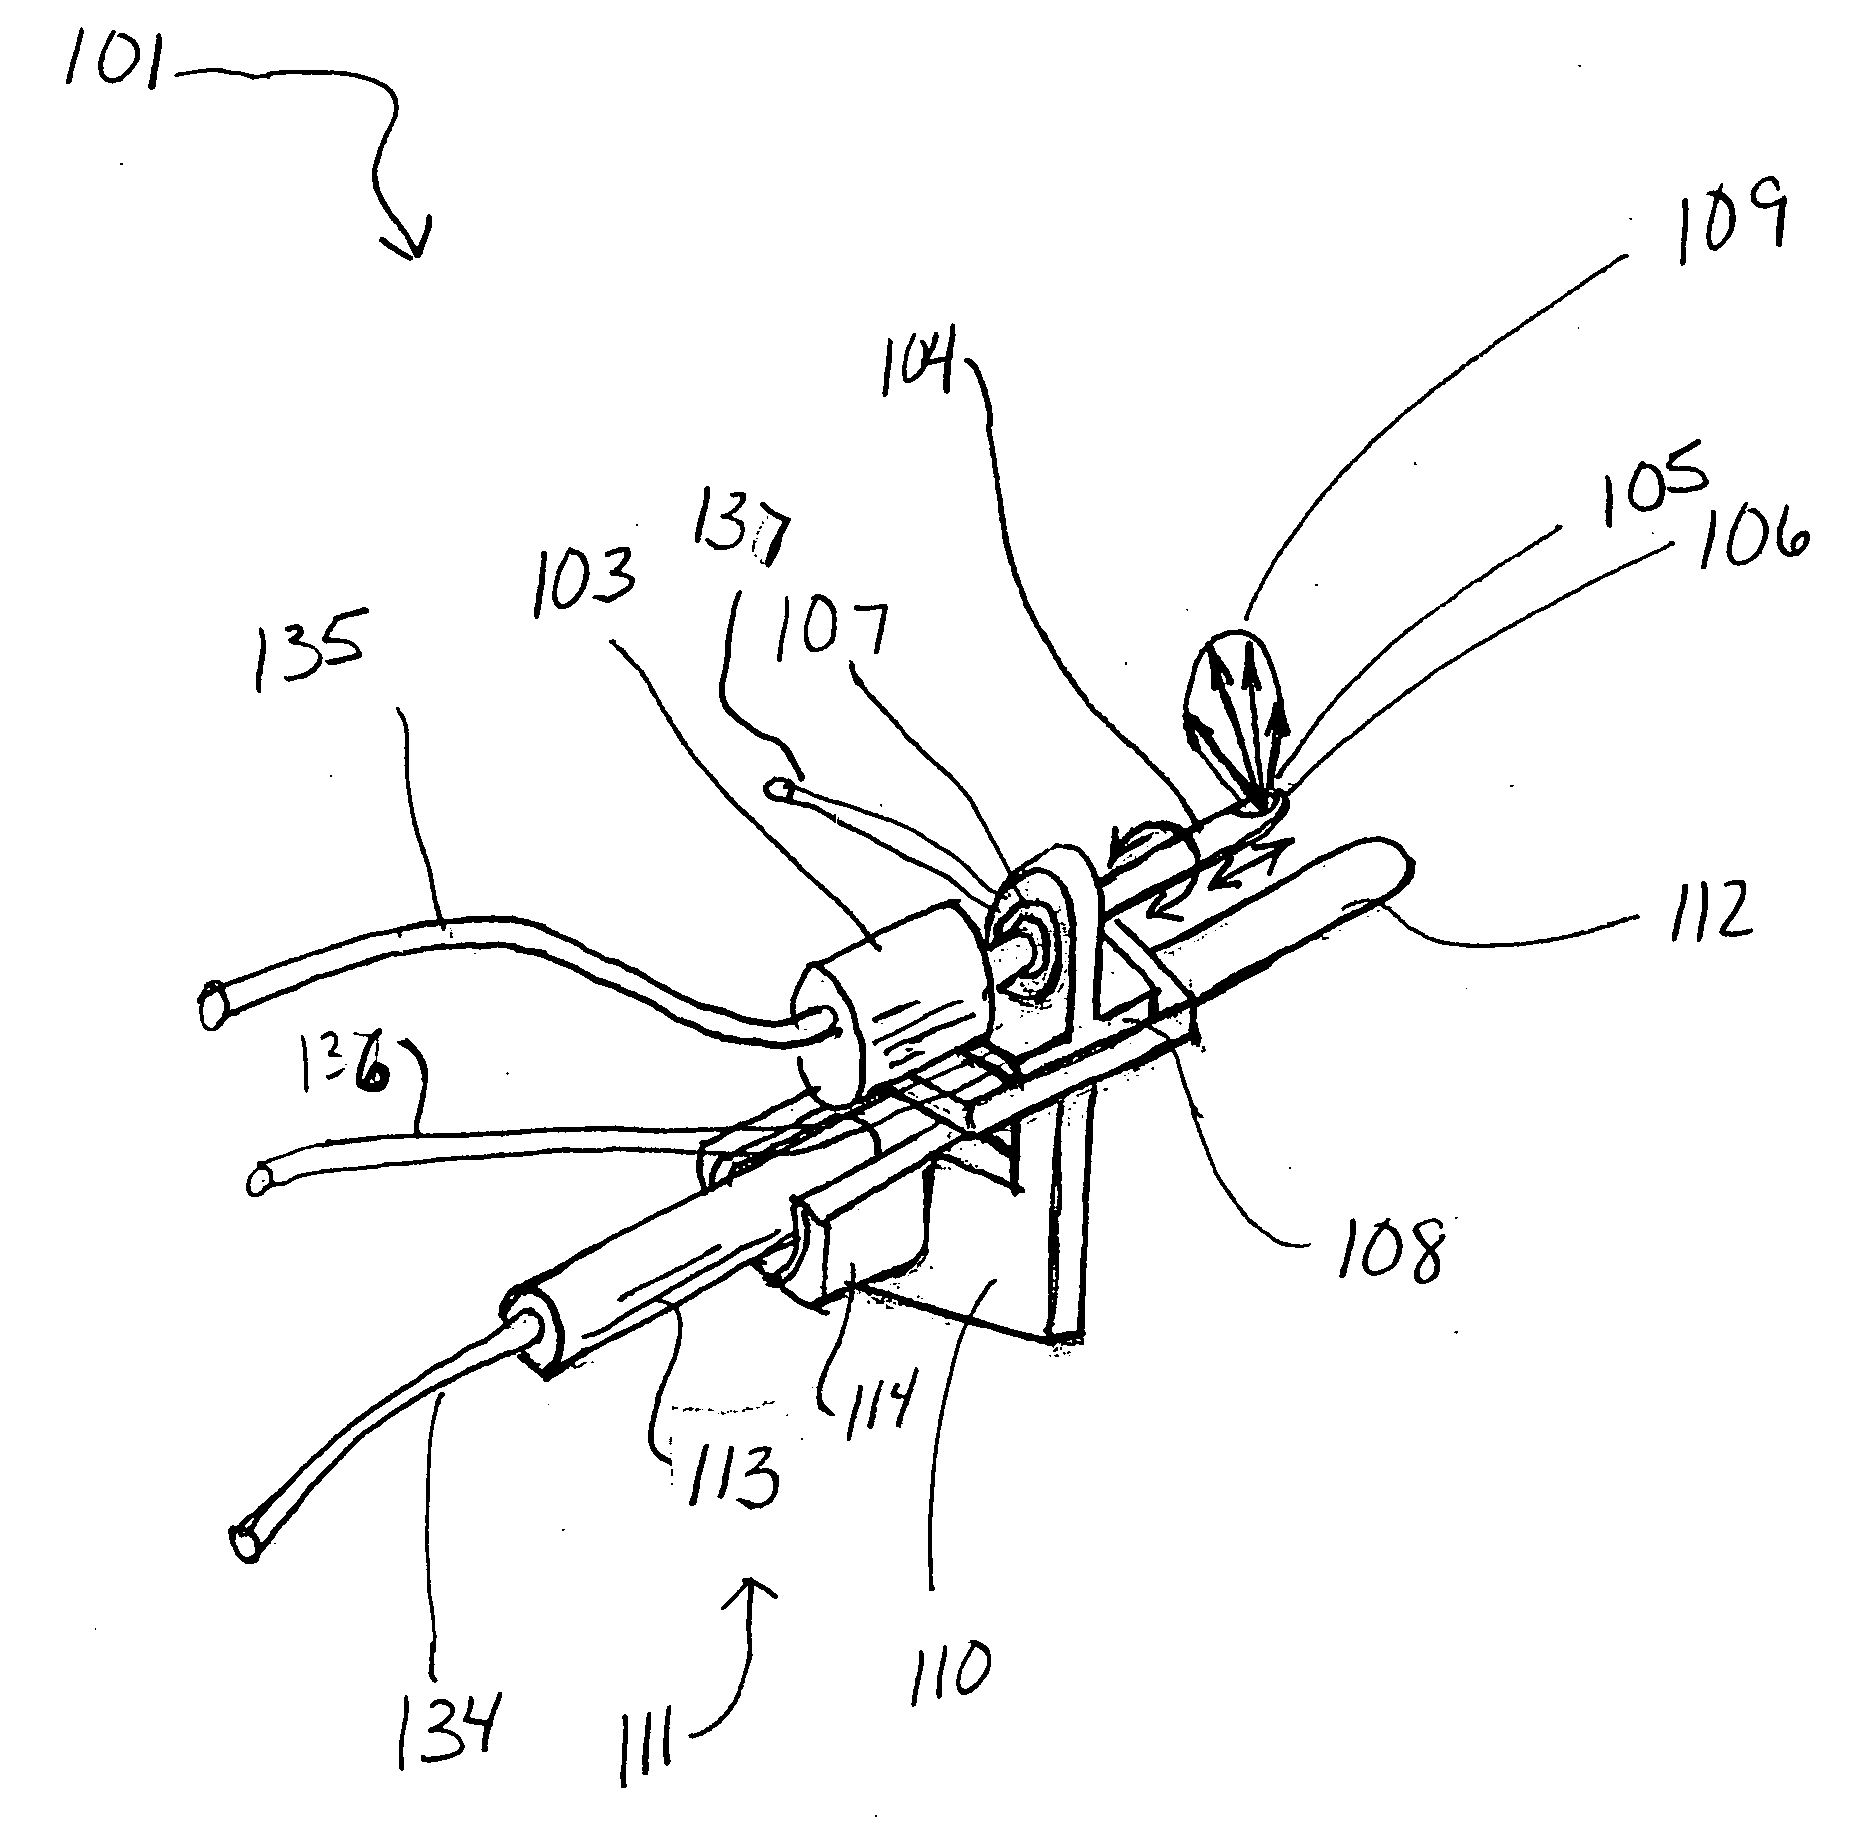 Apparatus and method for conformal radiation brachytherapy for prostate gland and other tumors